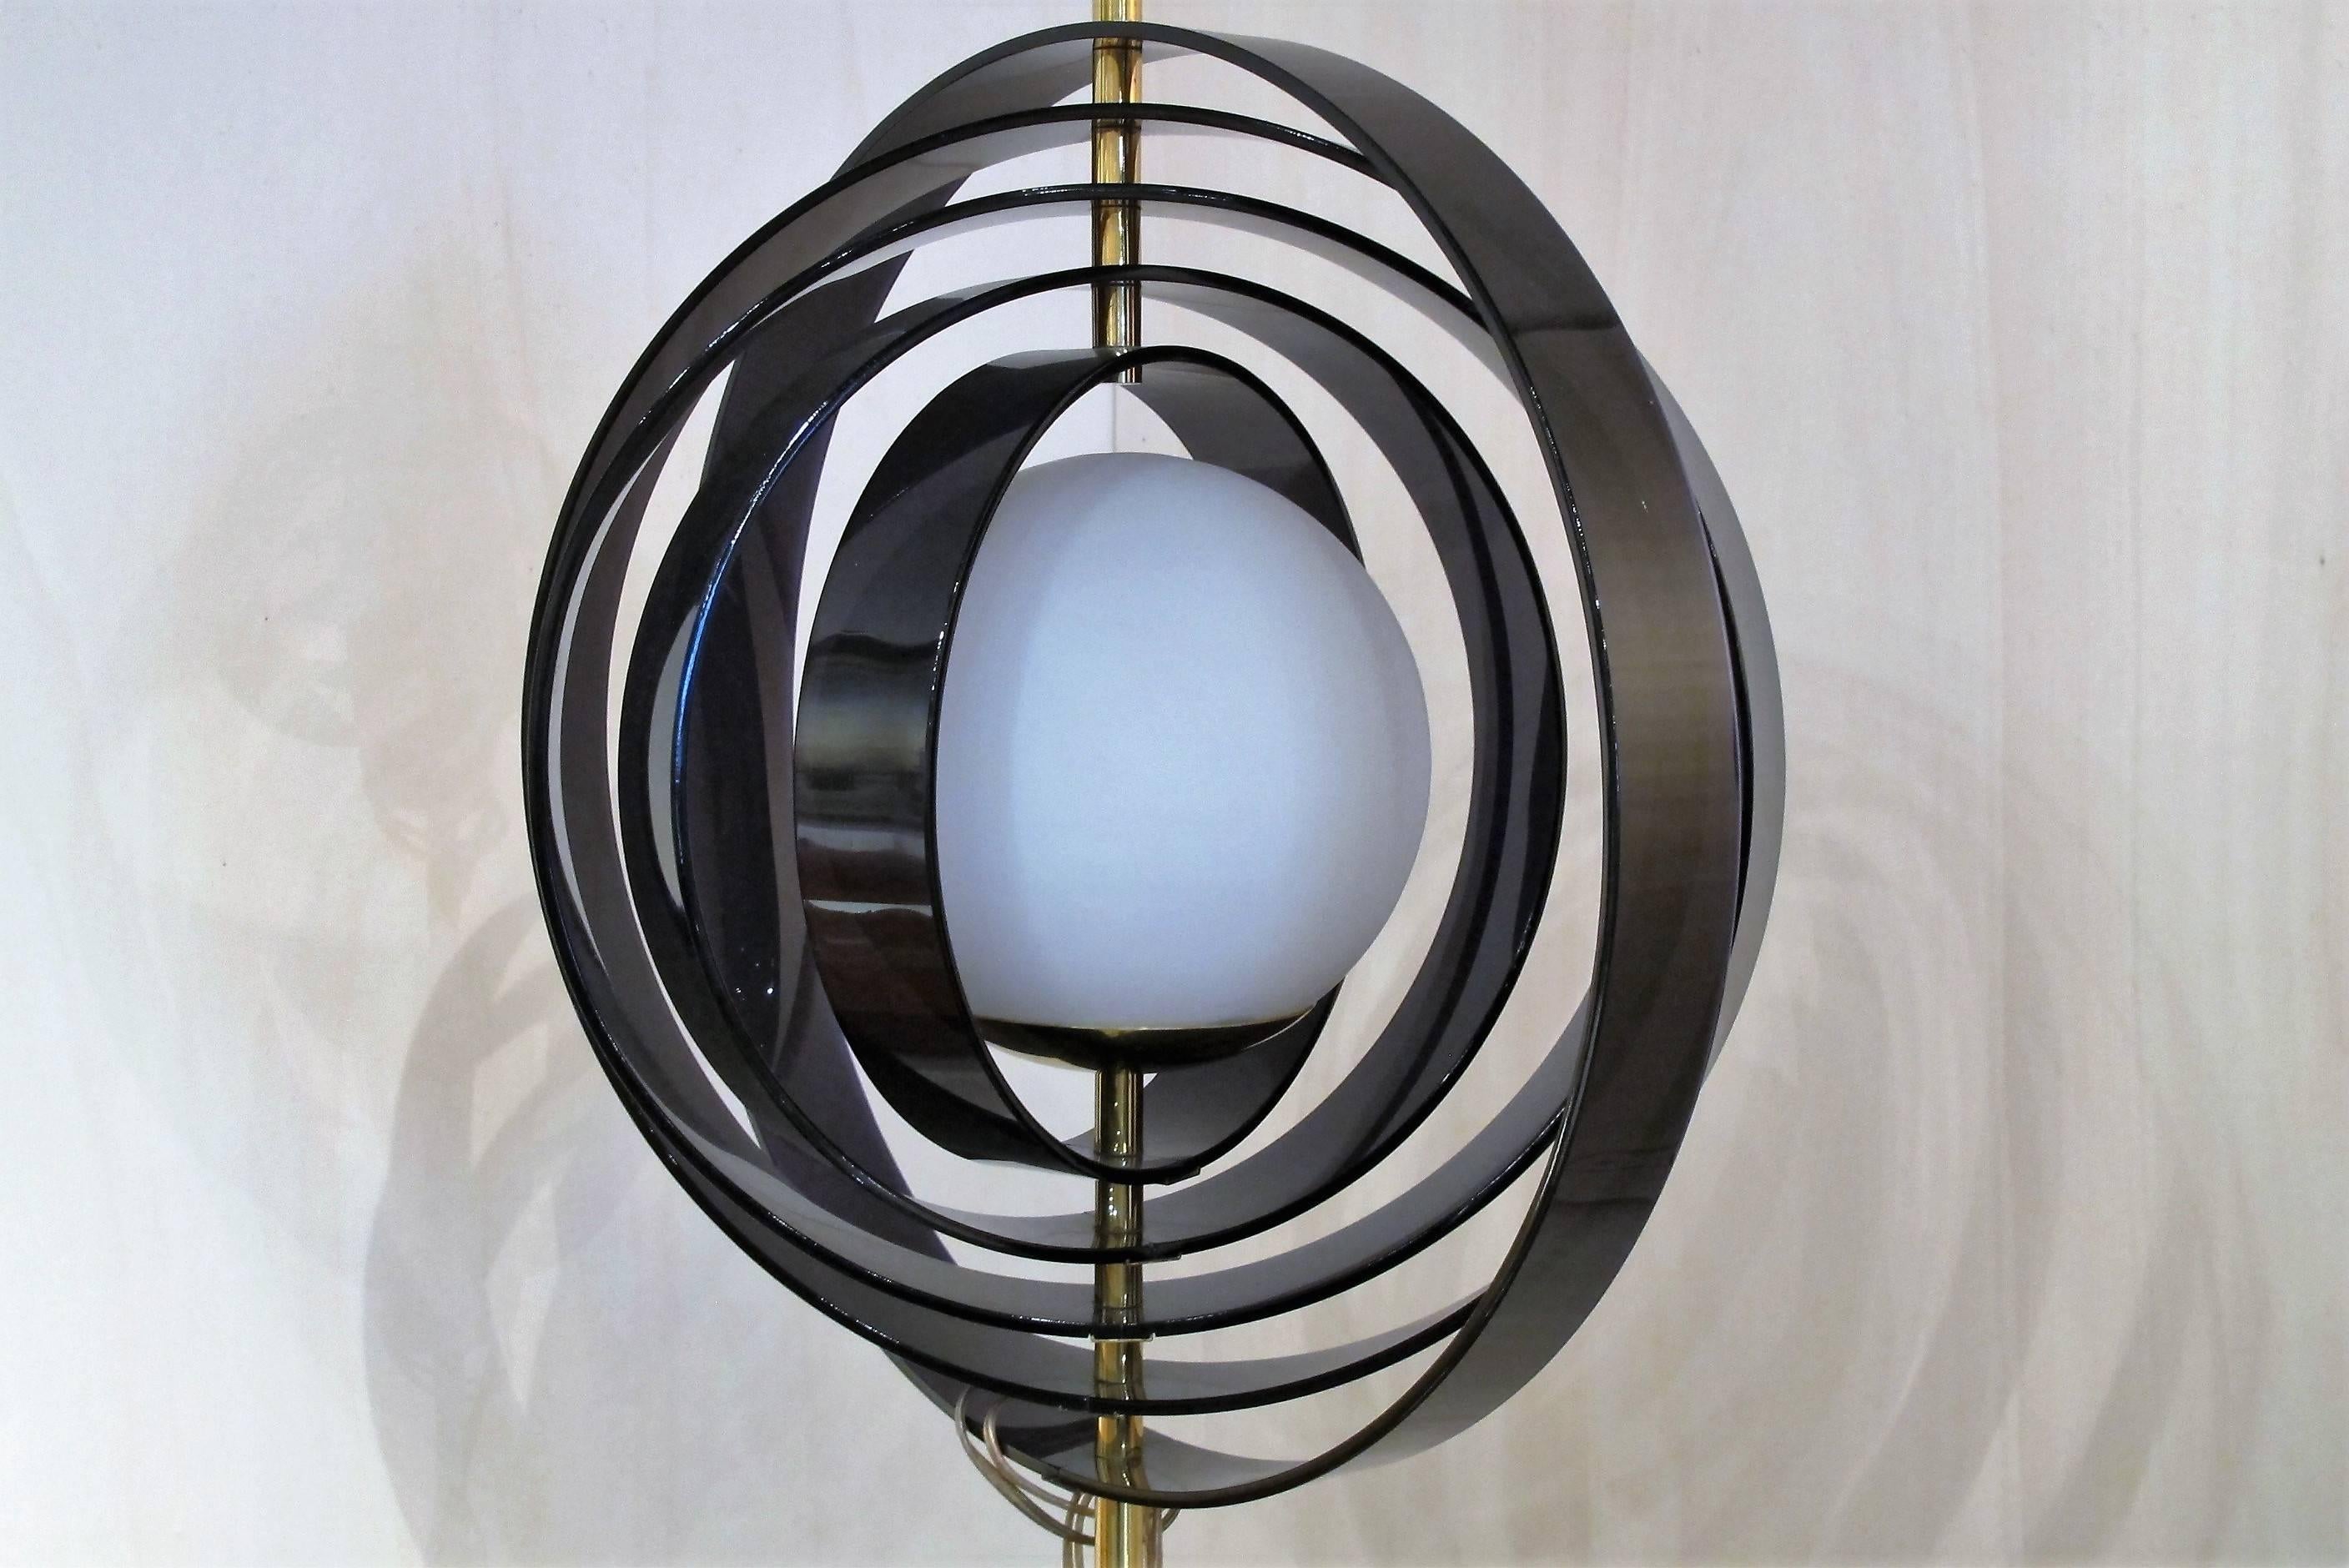 A beautiful floor lamp by Stilux Milano, made of black lacquered metal and brass. The glass spherical lamp-shade is surrounded by five black/ dark purple colored plastic slats, on a white marble base.